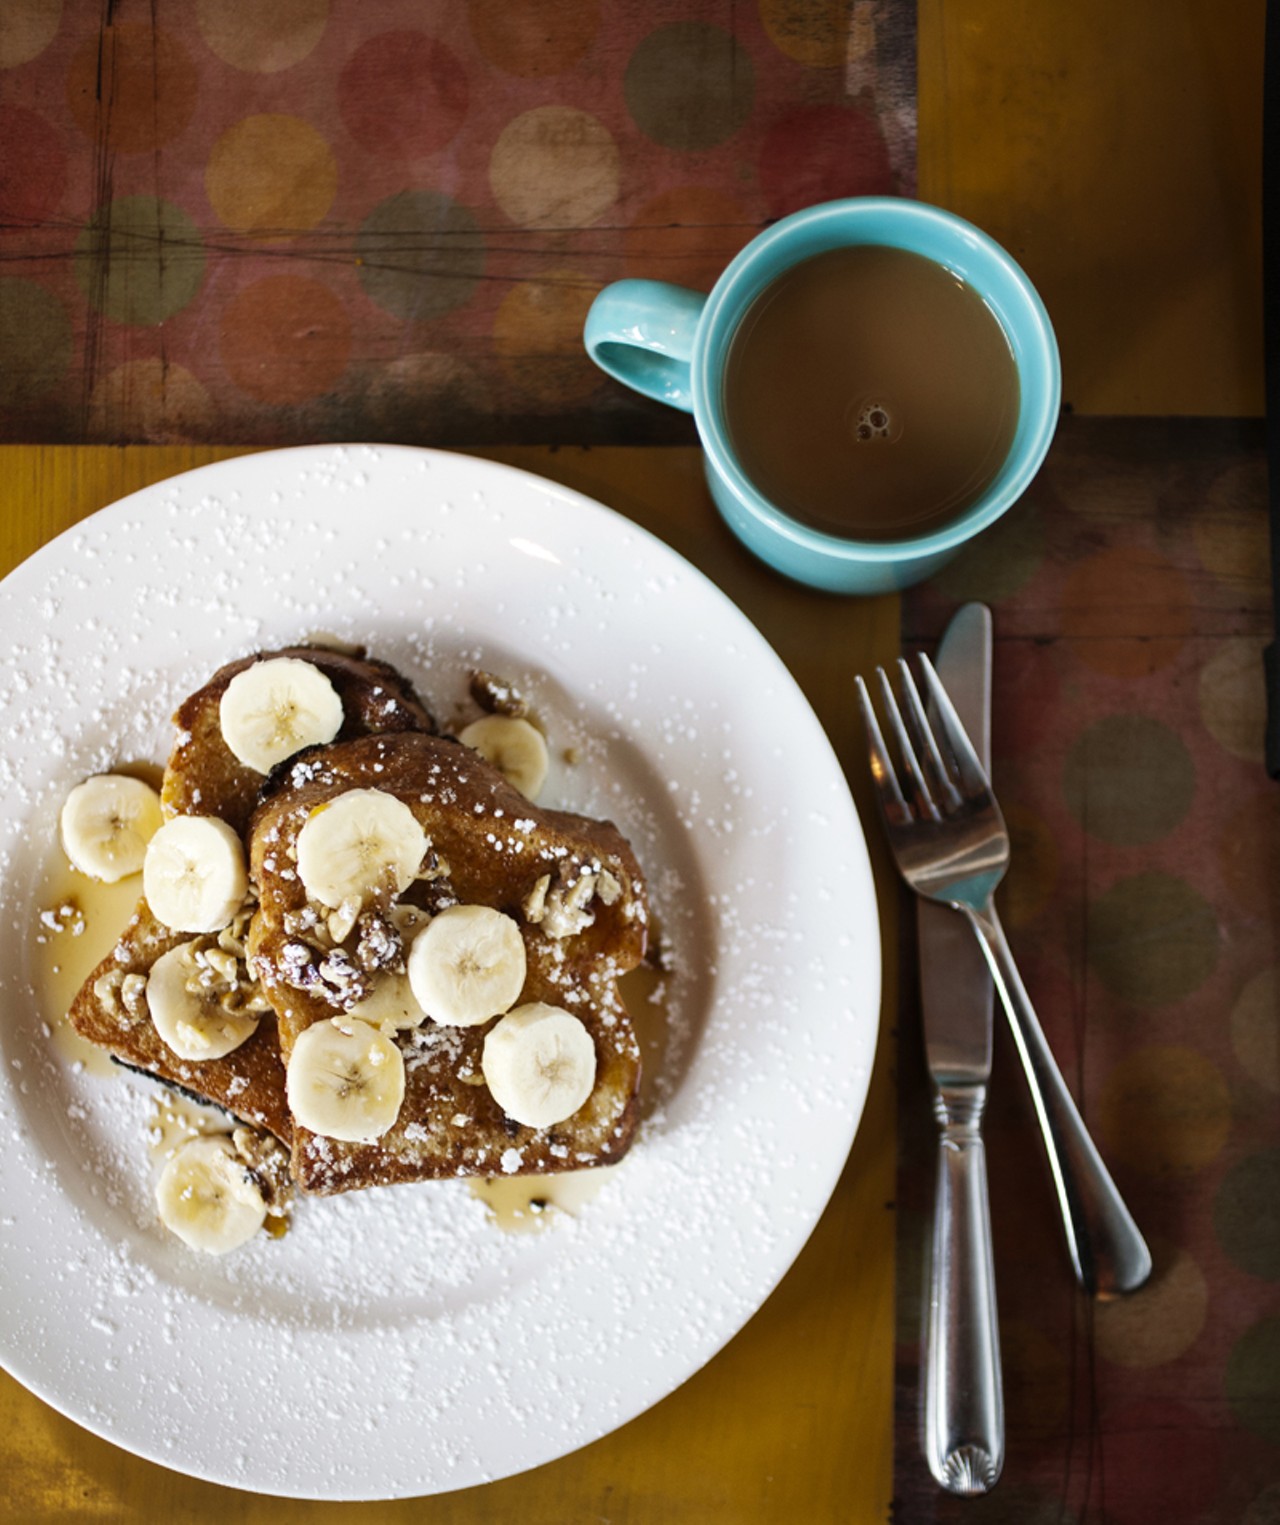 French Toast with apples and raisins or bananas. Shown here with bananas and coffee.